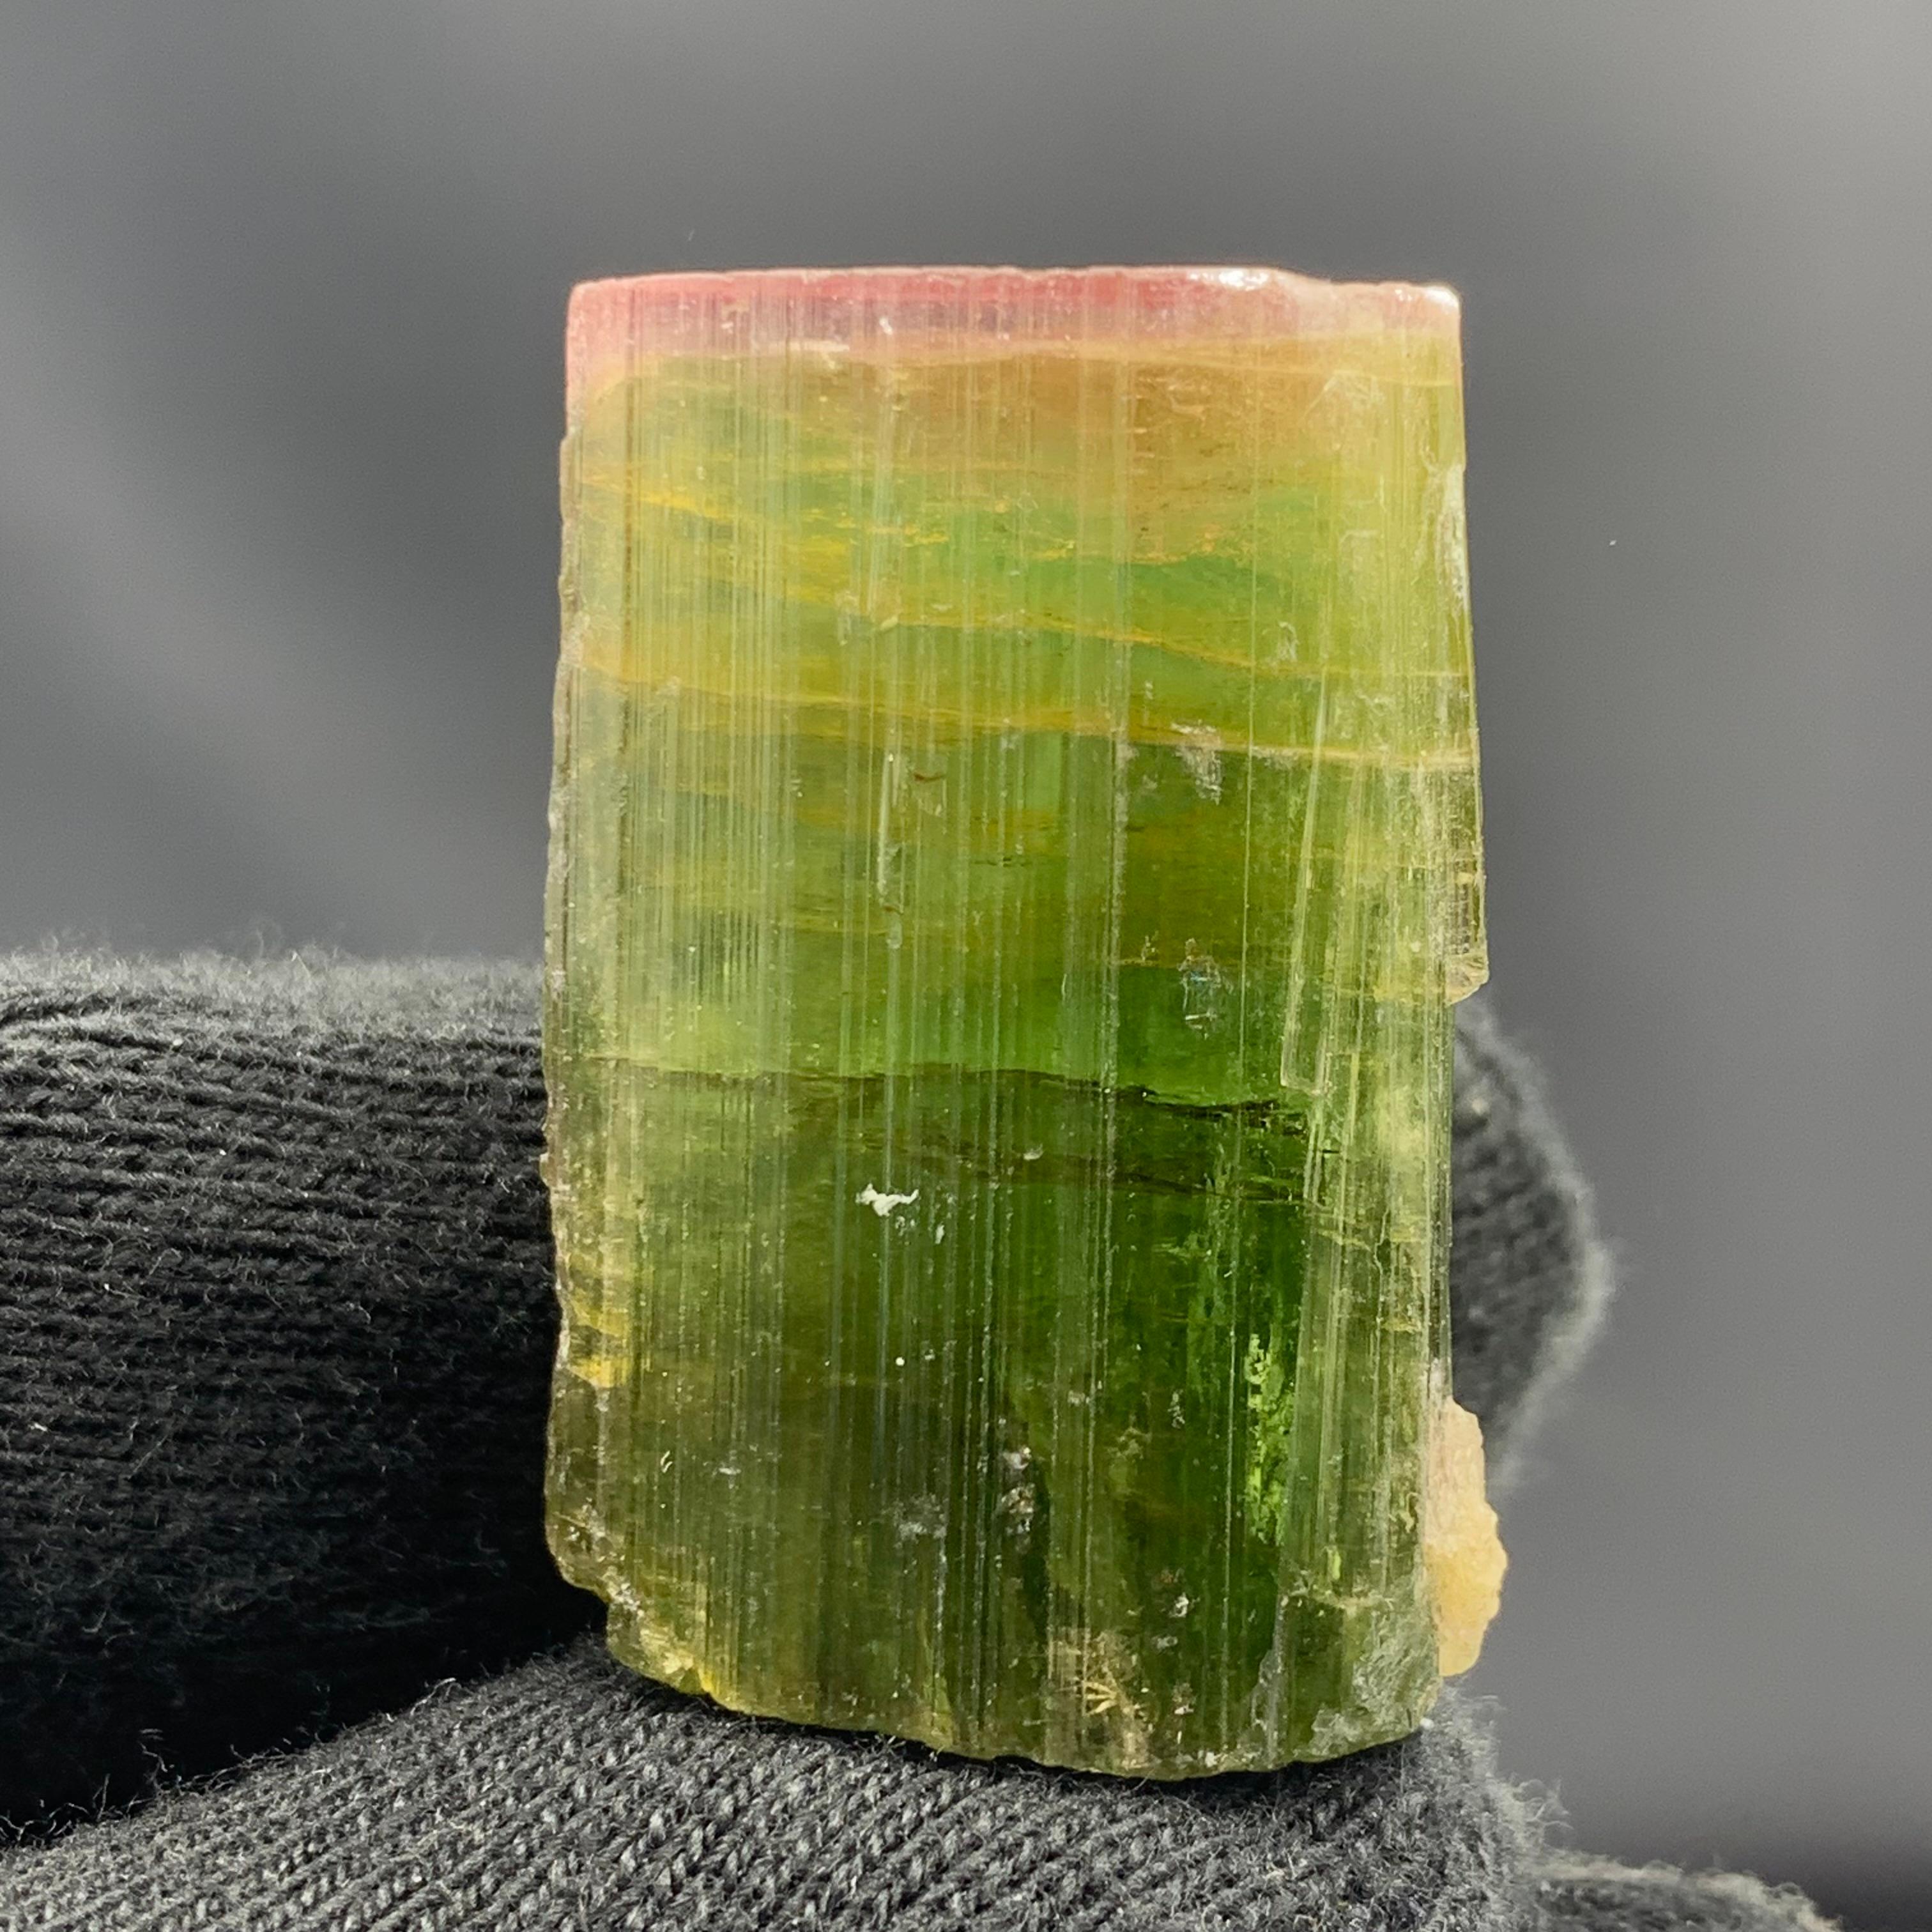 20.63 Gram Elegant Pink Cap Tri Color Tourmaline From Paprook, Afghanistan 

Weight: 20.63 Gram 
Dimension : 3.3 x 2.1 x 1.3 Cm 
Origin: Paprook Mine, Afghanistan 

Tourmaline is a crystalline silicate mineral group in which boron is compounded with